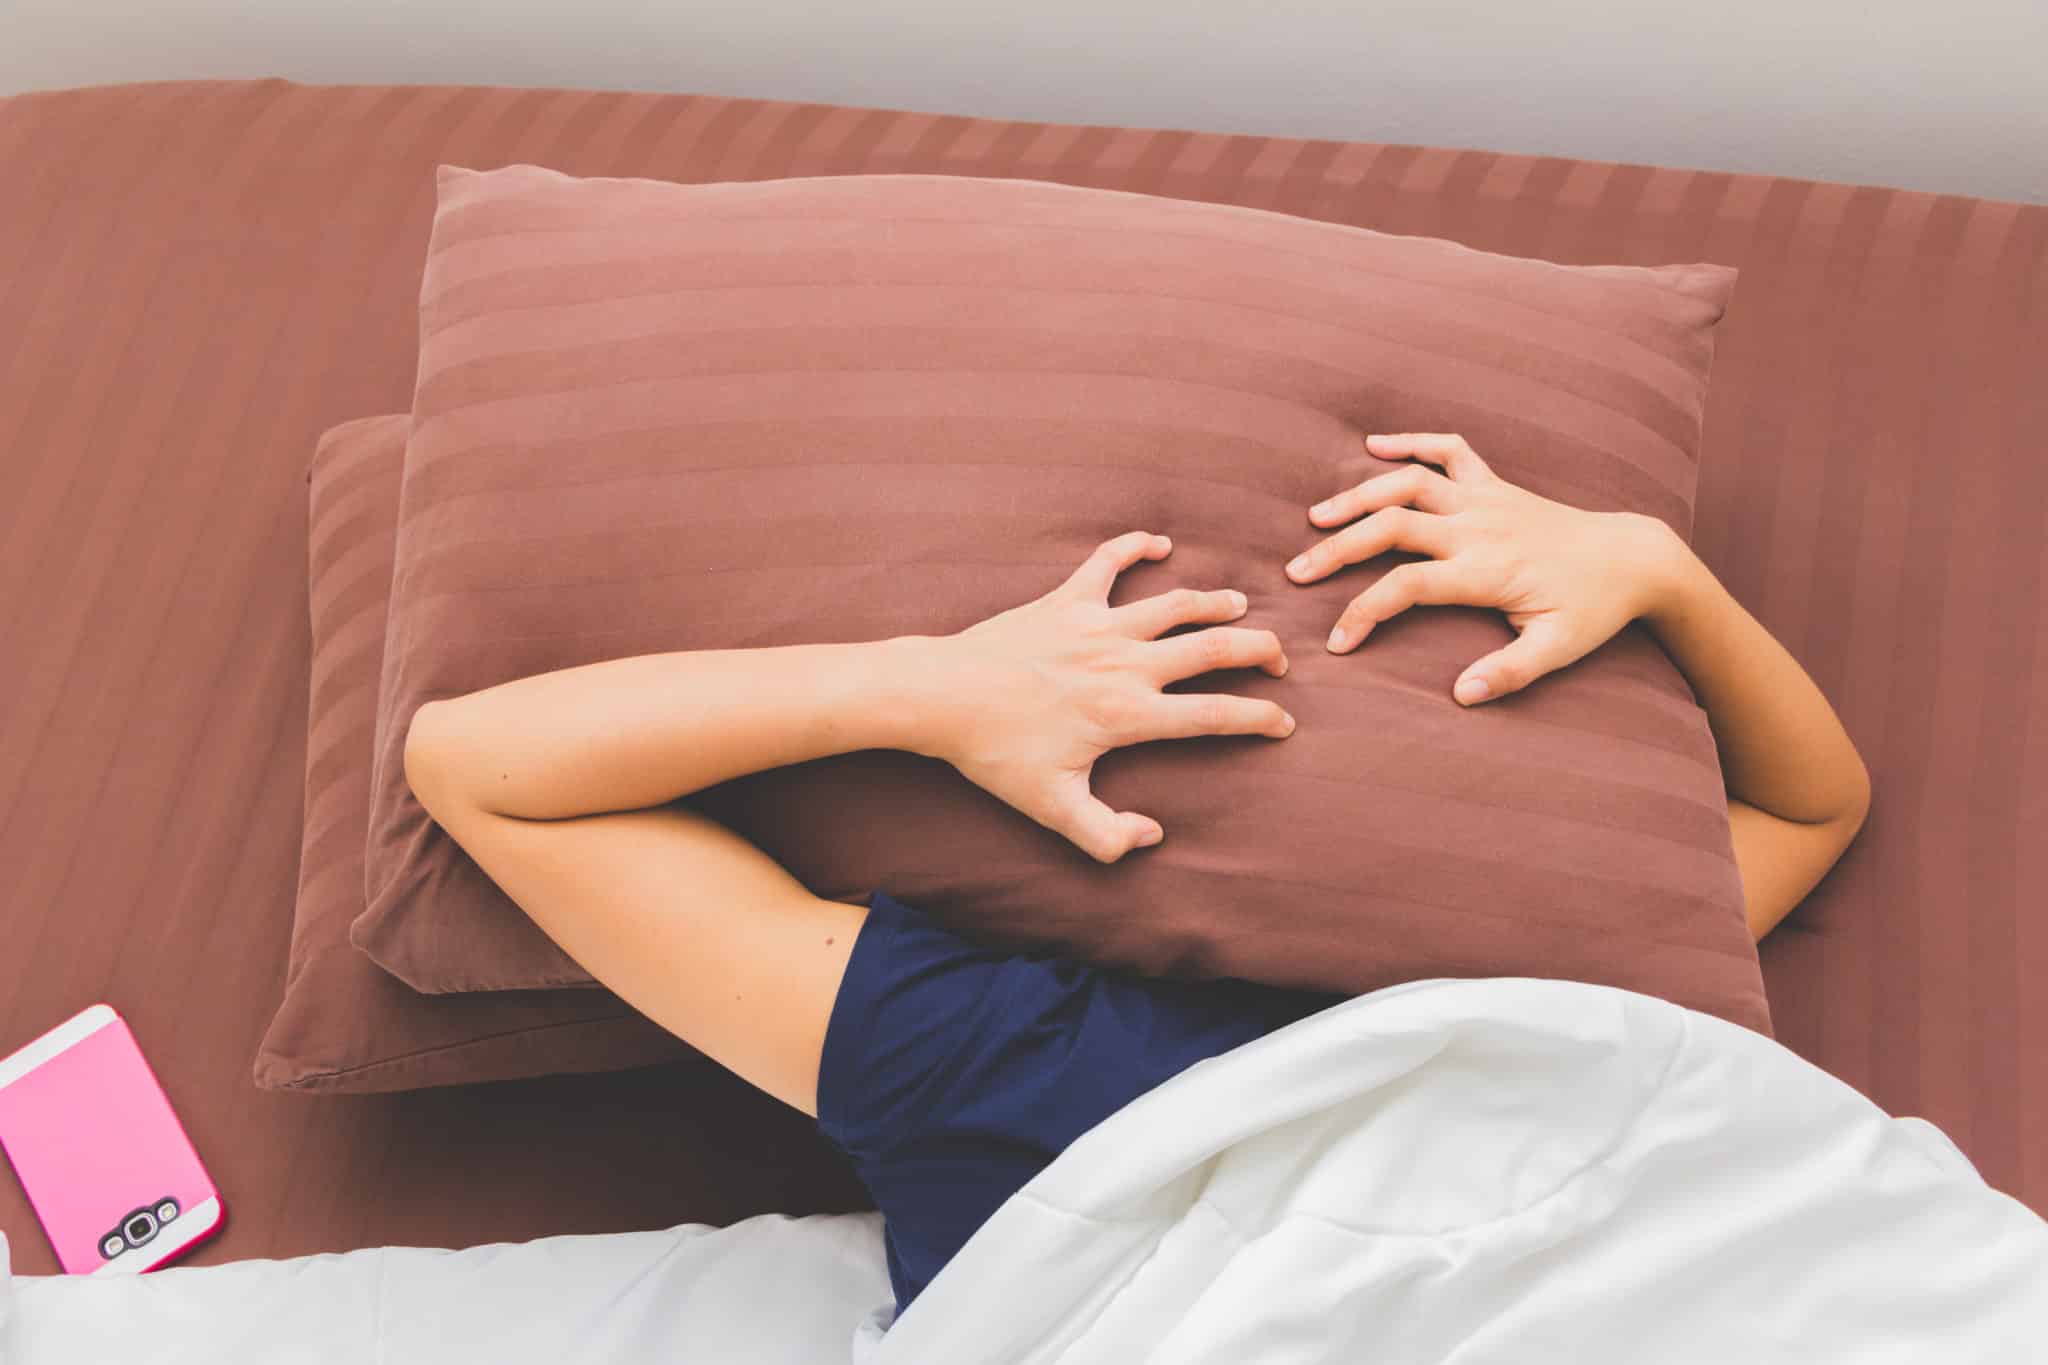 A person struggling to sleep putting a pillow over their head in bed.